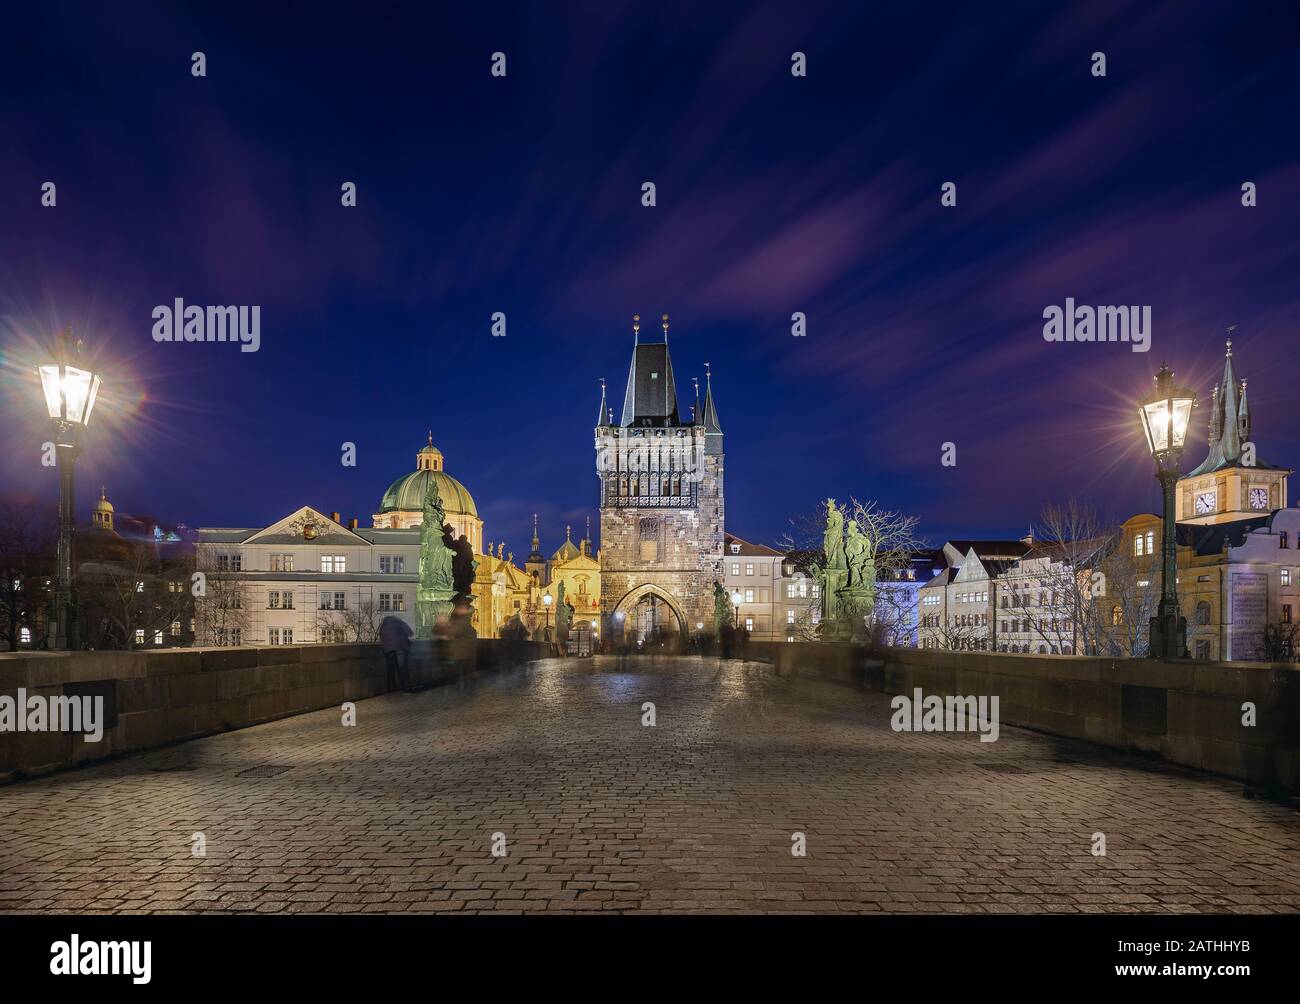 Prague, Czech Republic - Long exposure photograph about the world famous Charles Bridge (Karluv most) with St. Francis of Assisi Church and blue night Stock Photo